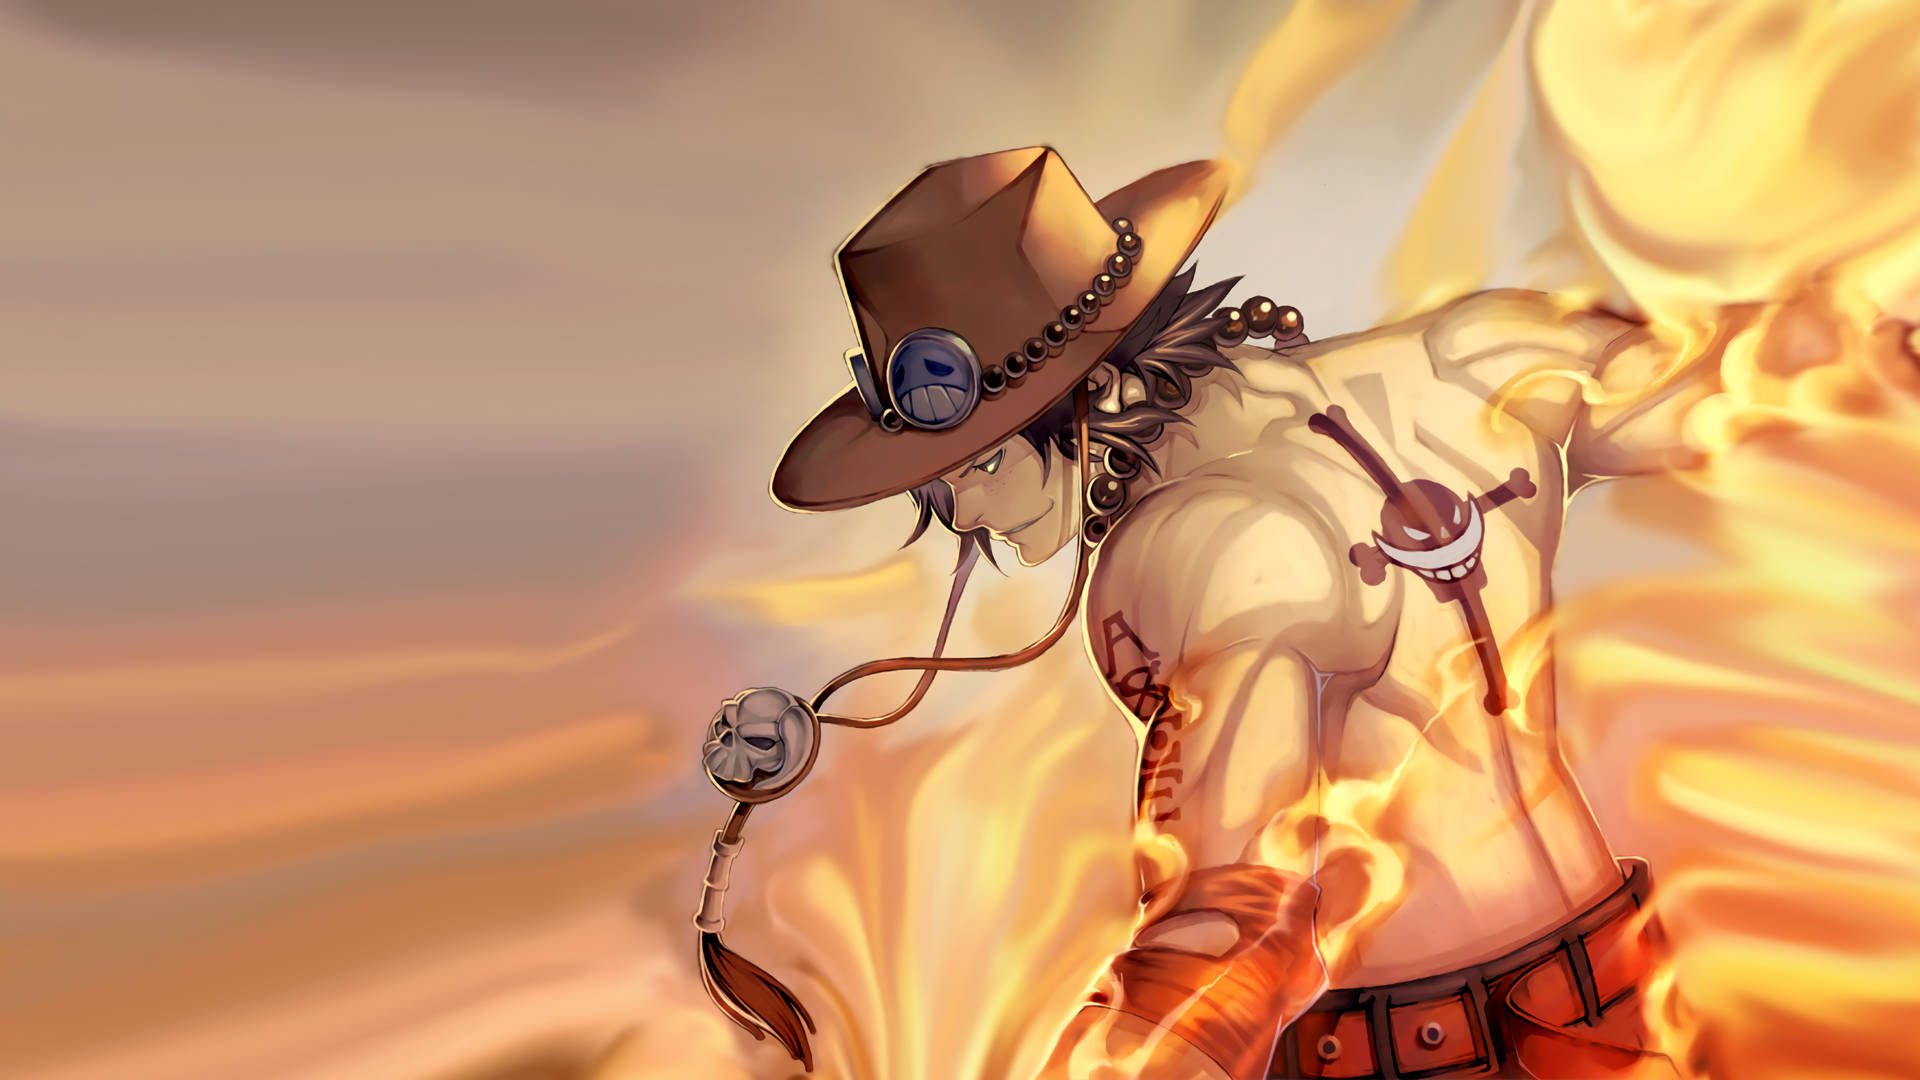 A Pioneering Spirit - Portgas D. Ace Of One Piece